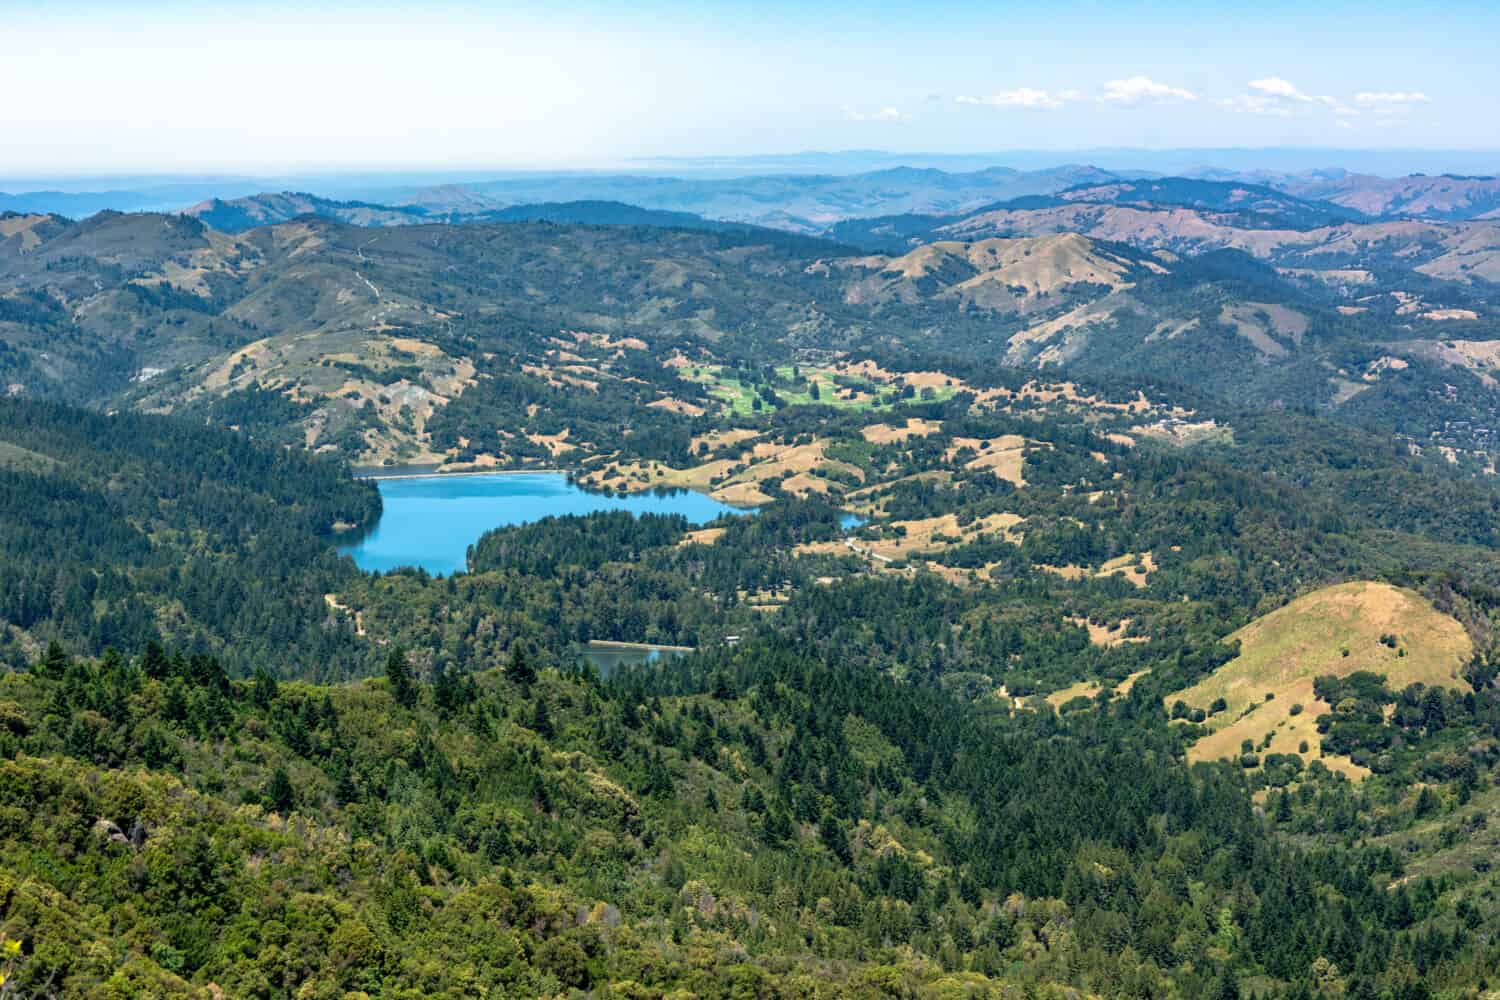 The peak of Mt Tamalpais State Park, Marin County, California. San Francisco bay area visible in the background. The result of uplift, buckling, and folding of the North American Plate.